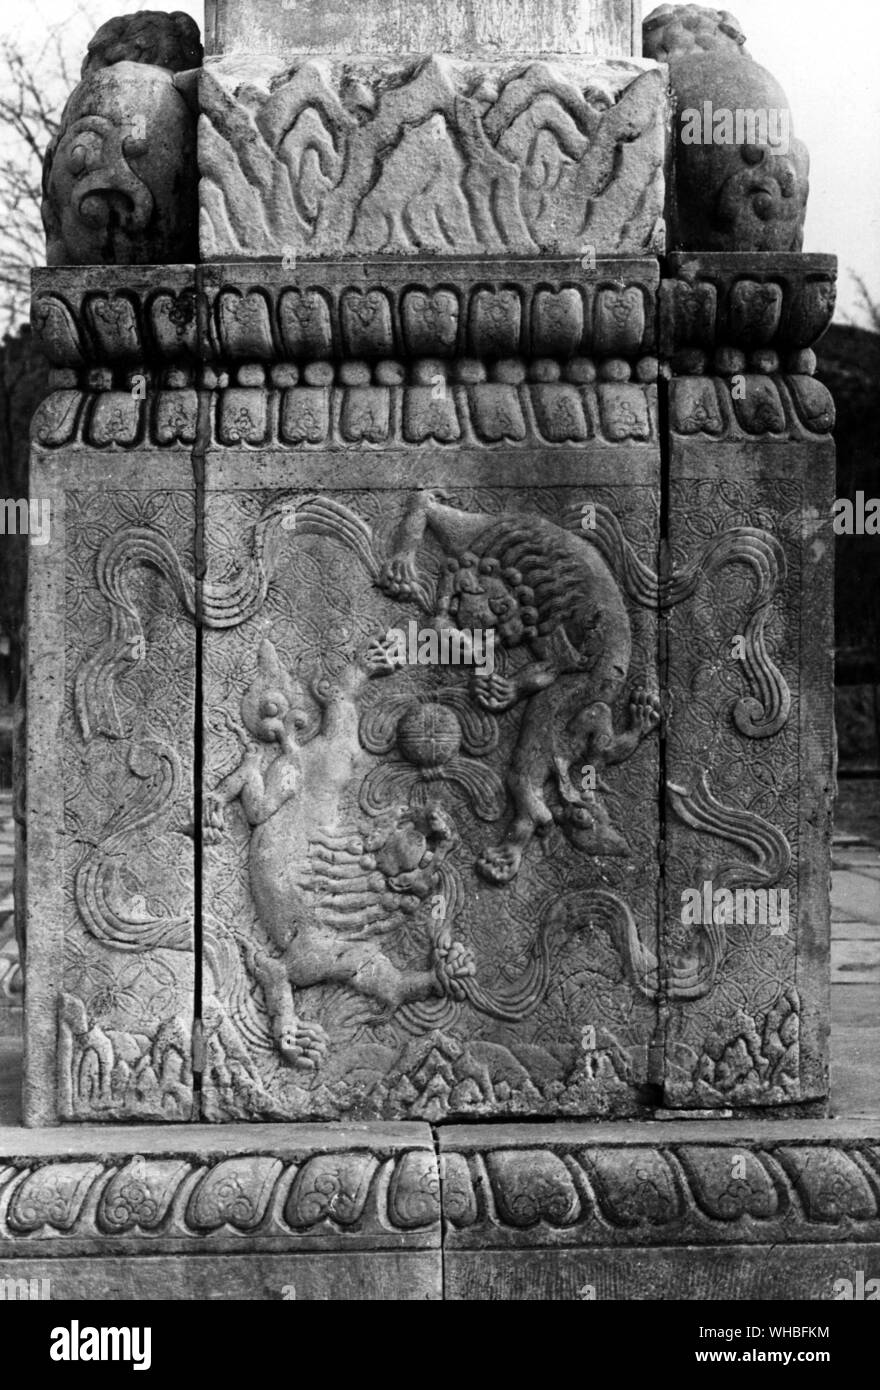 Sculpted relief on white marble arch (shipai fang) erected in 1540 as entrance to the Way of the Spirits in the Ming Tombs, Peking.. Stock Photo